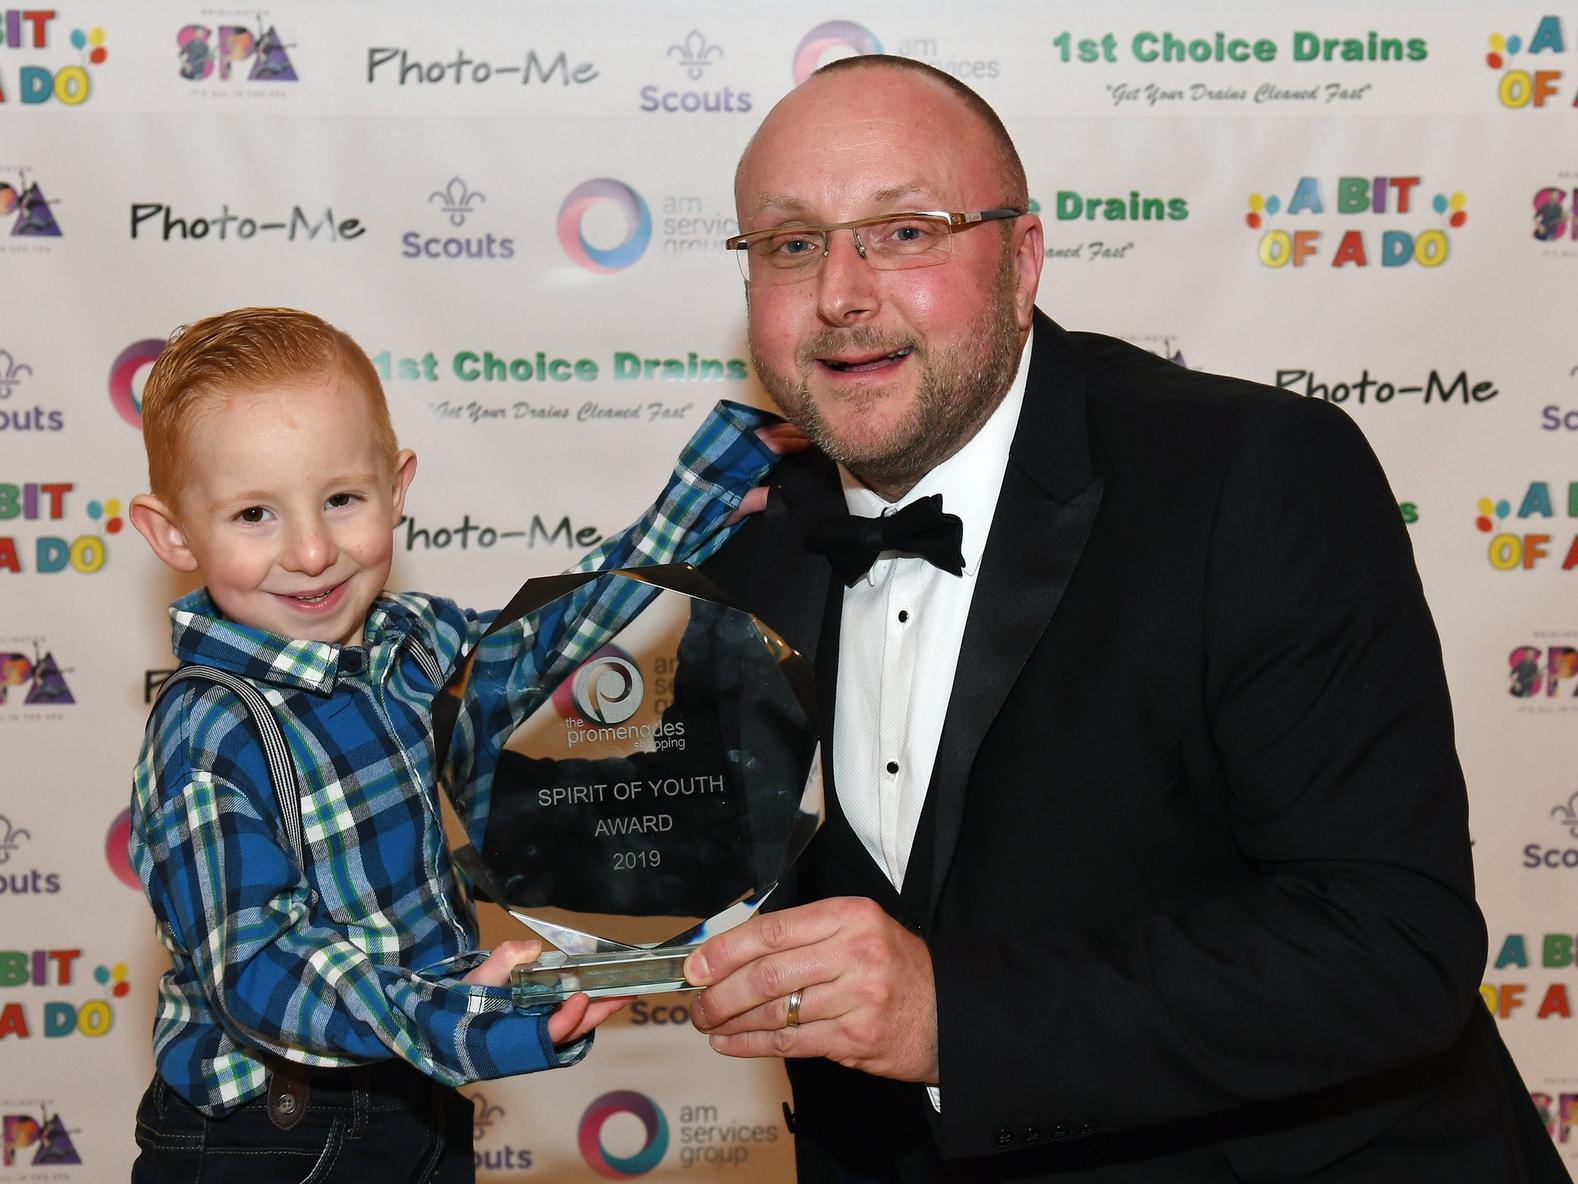 Carl Brown, Promenades Centre Manager, presents the Spirit of Youth Award to Ronnie Kemp-Duke